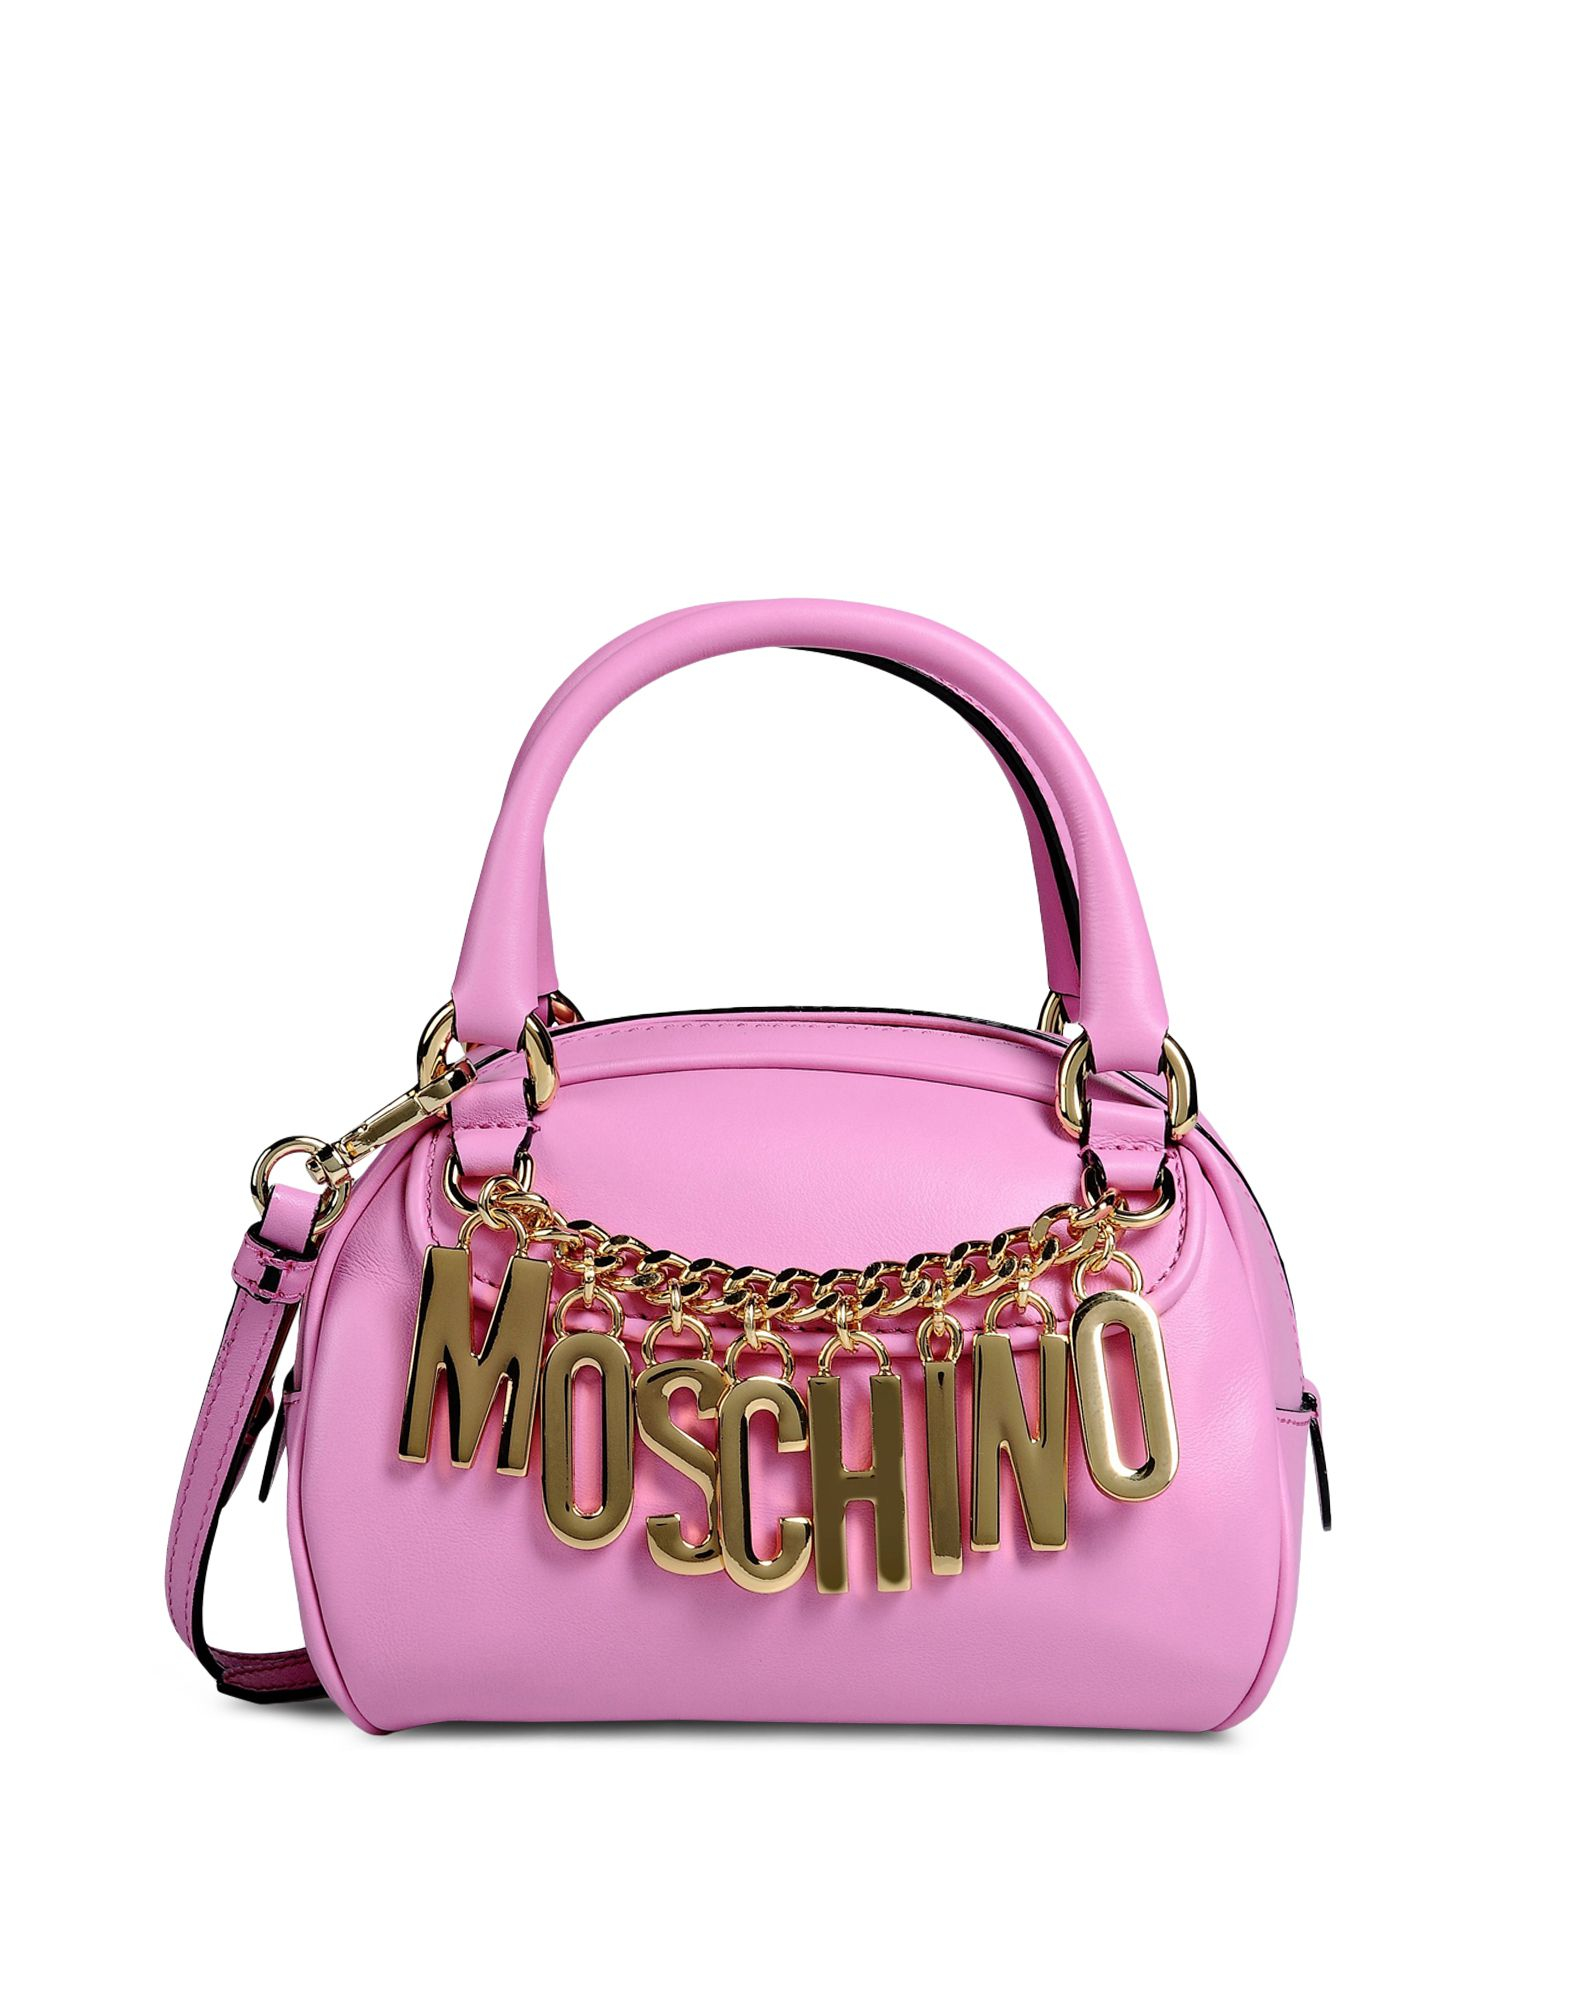 Moschino Small Leather Bag in Pink | Lyst